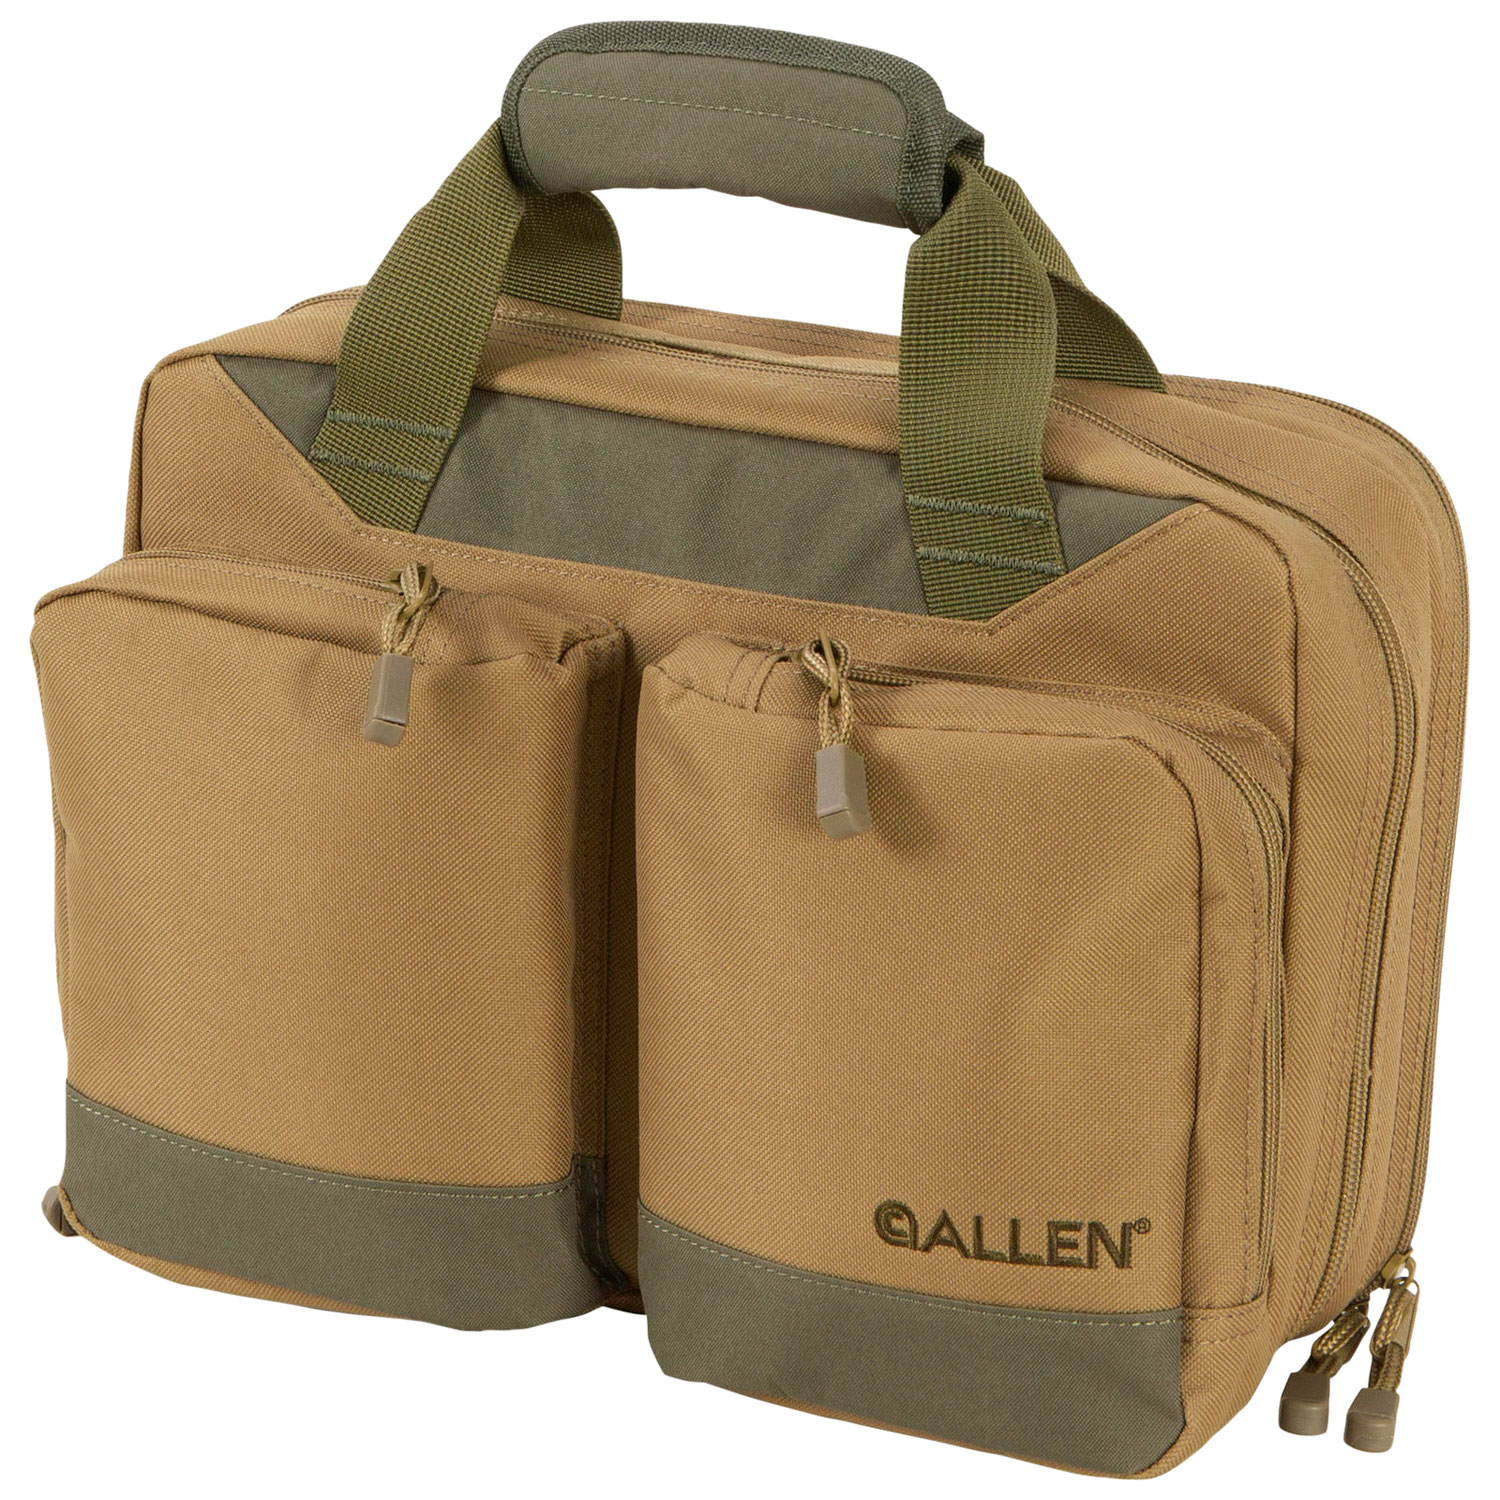 Allen 7603 Double Attache Handgun Case with Tan Finish & Olive Accents, 2 Padded Sleeve Pockets, 8 Mag Sleeves, Pockets for Ammo & Accessories & Foldout Shooting Mat Holds up to 2 Handguns